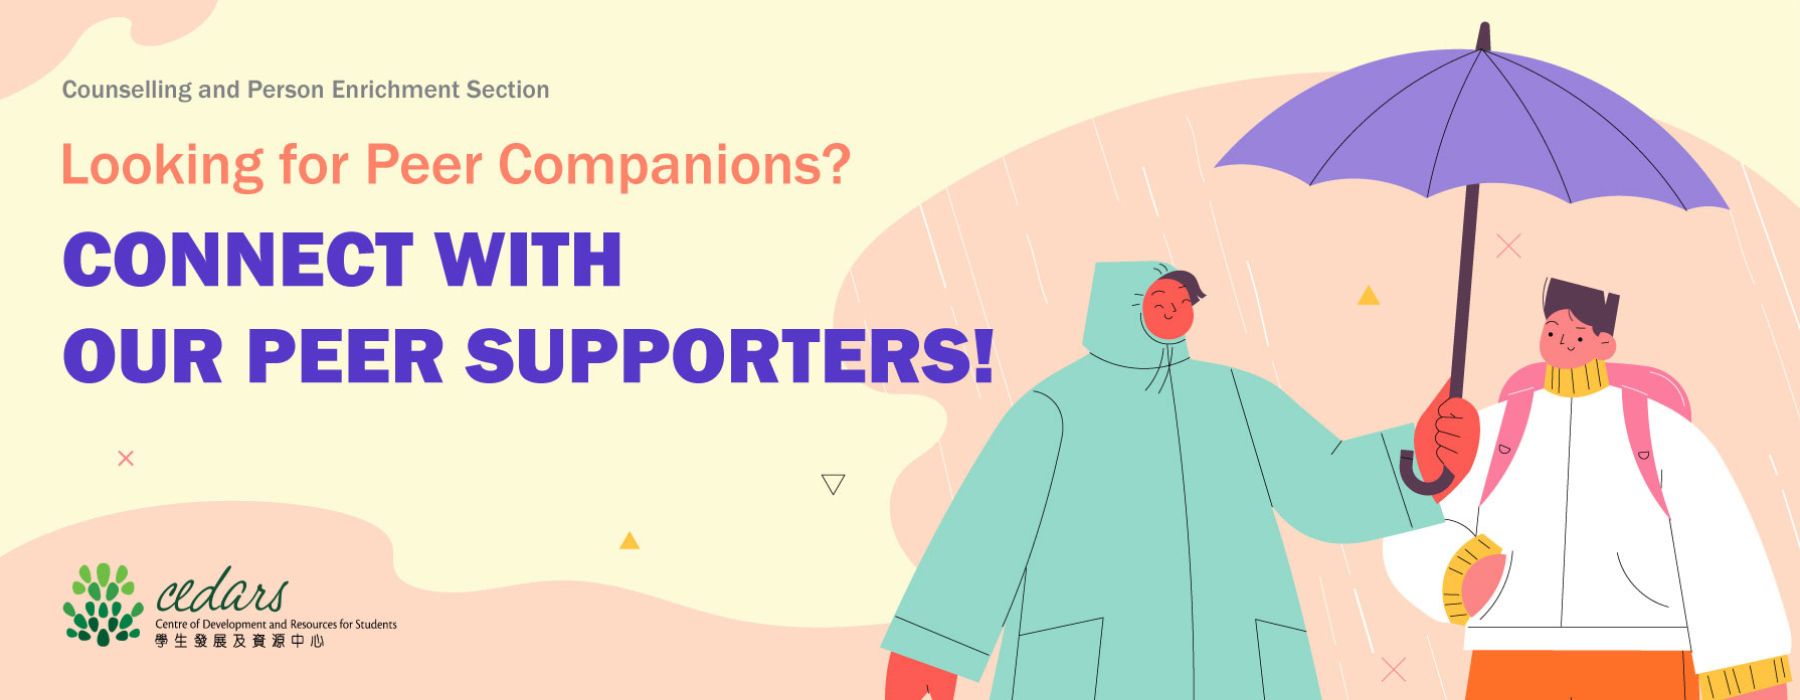 Connect with our peer supporters